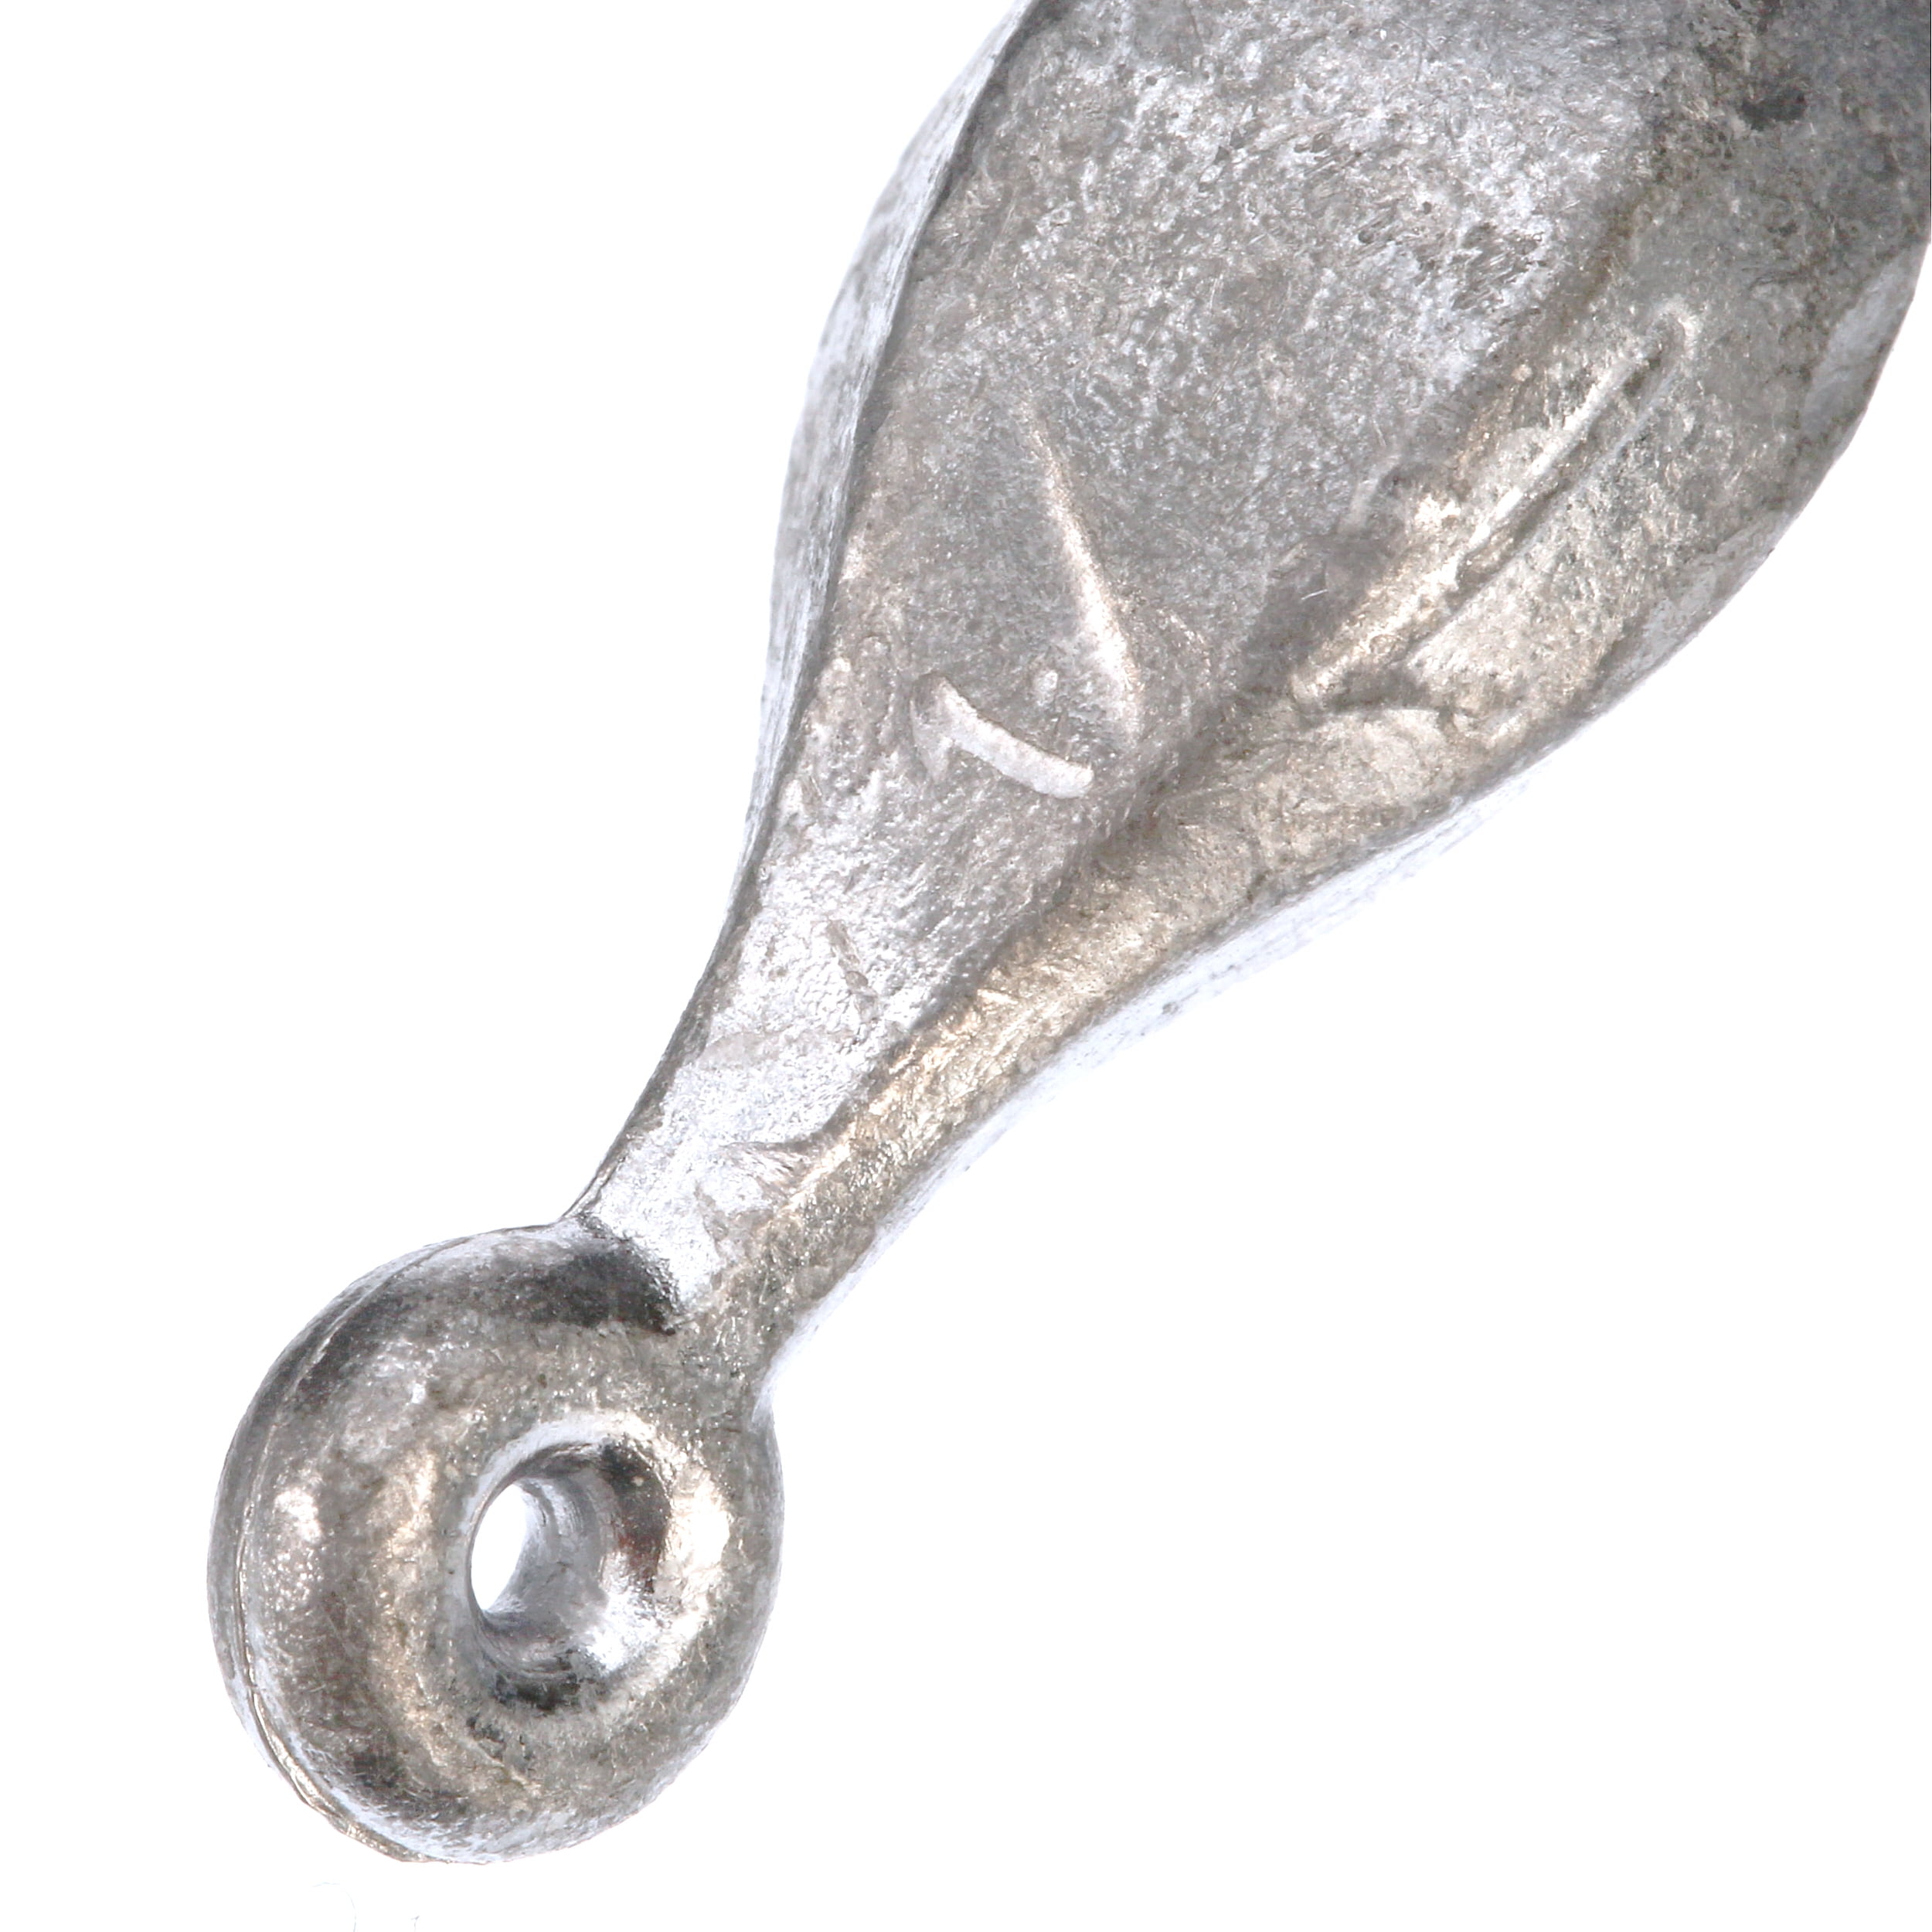 16 oz Bank Bell Sinkers 4/6/10/15 fishing weights FREE SHIPPING 